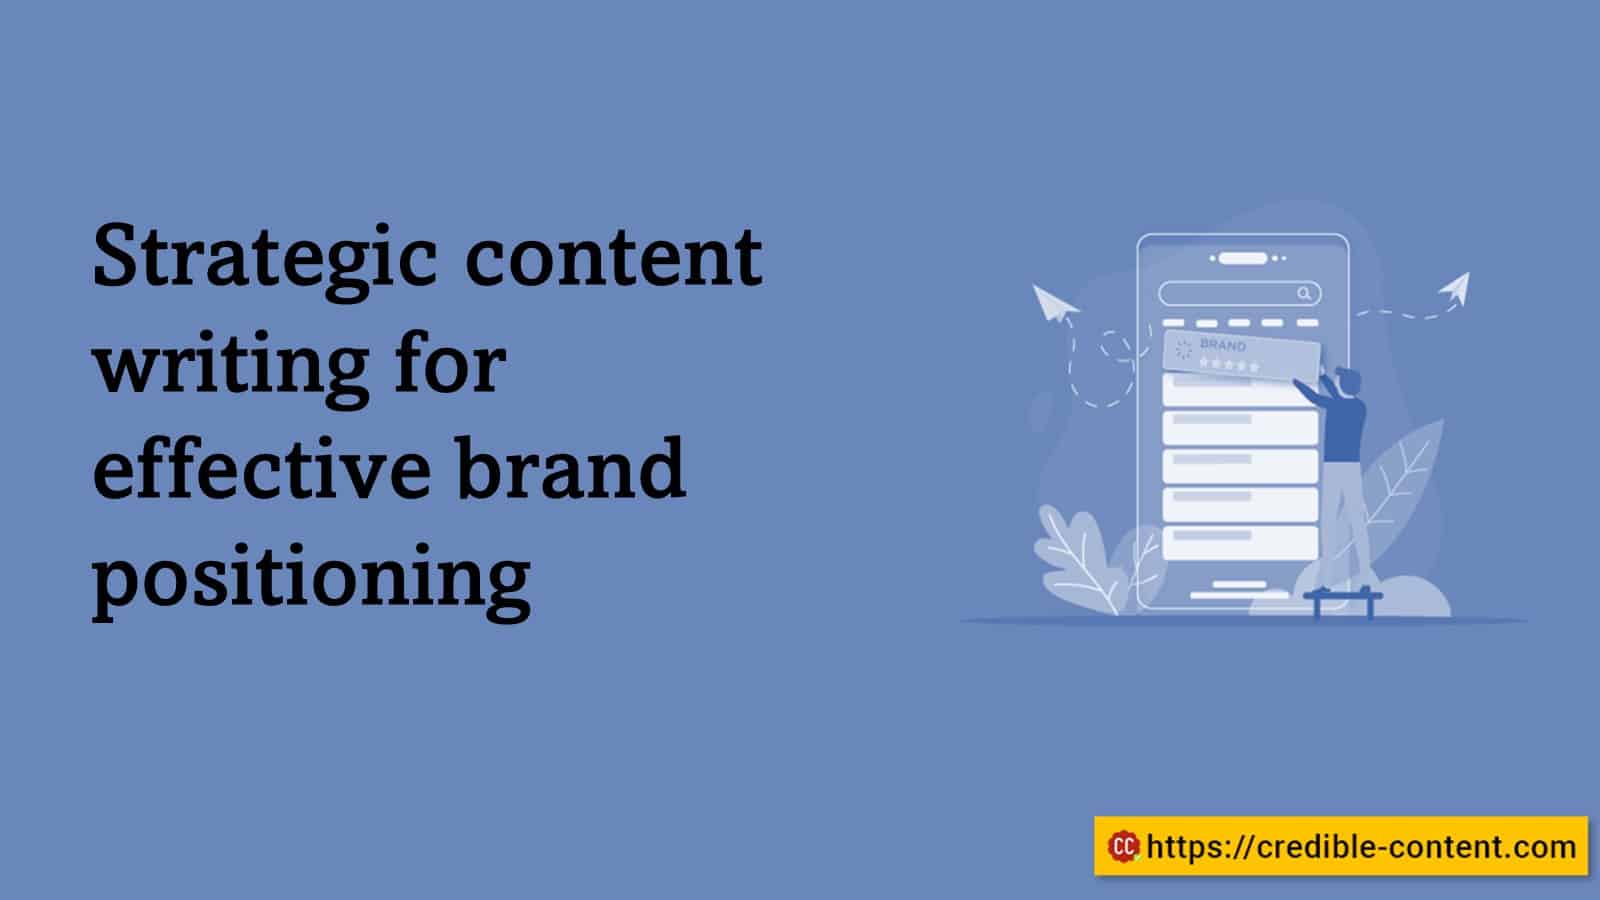 Strategic content writing for effective brand positioning